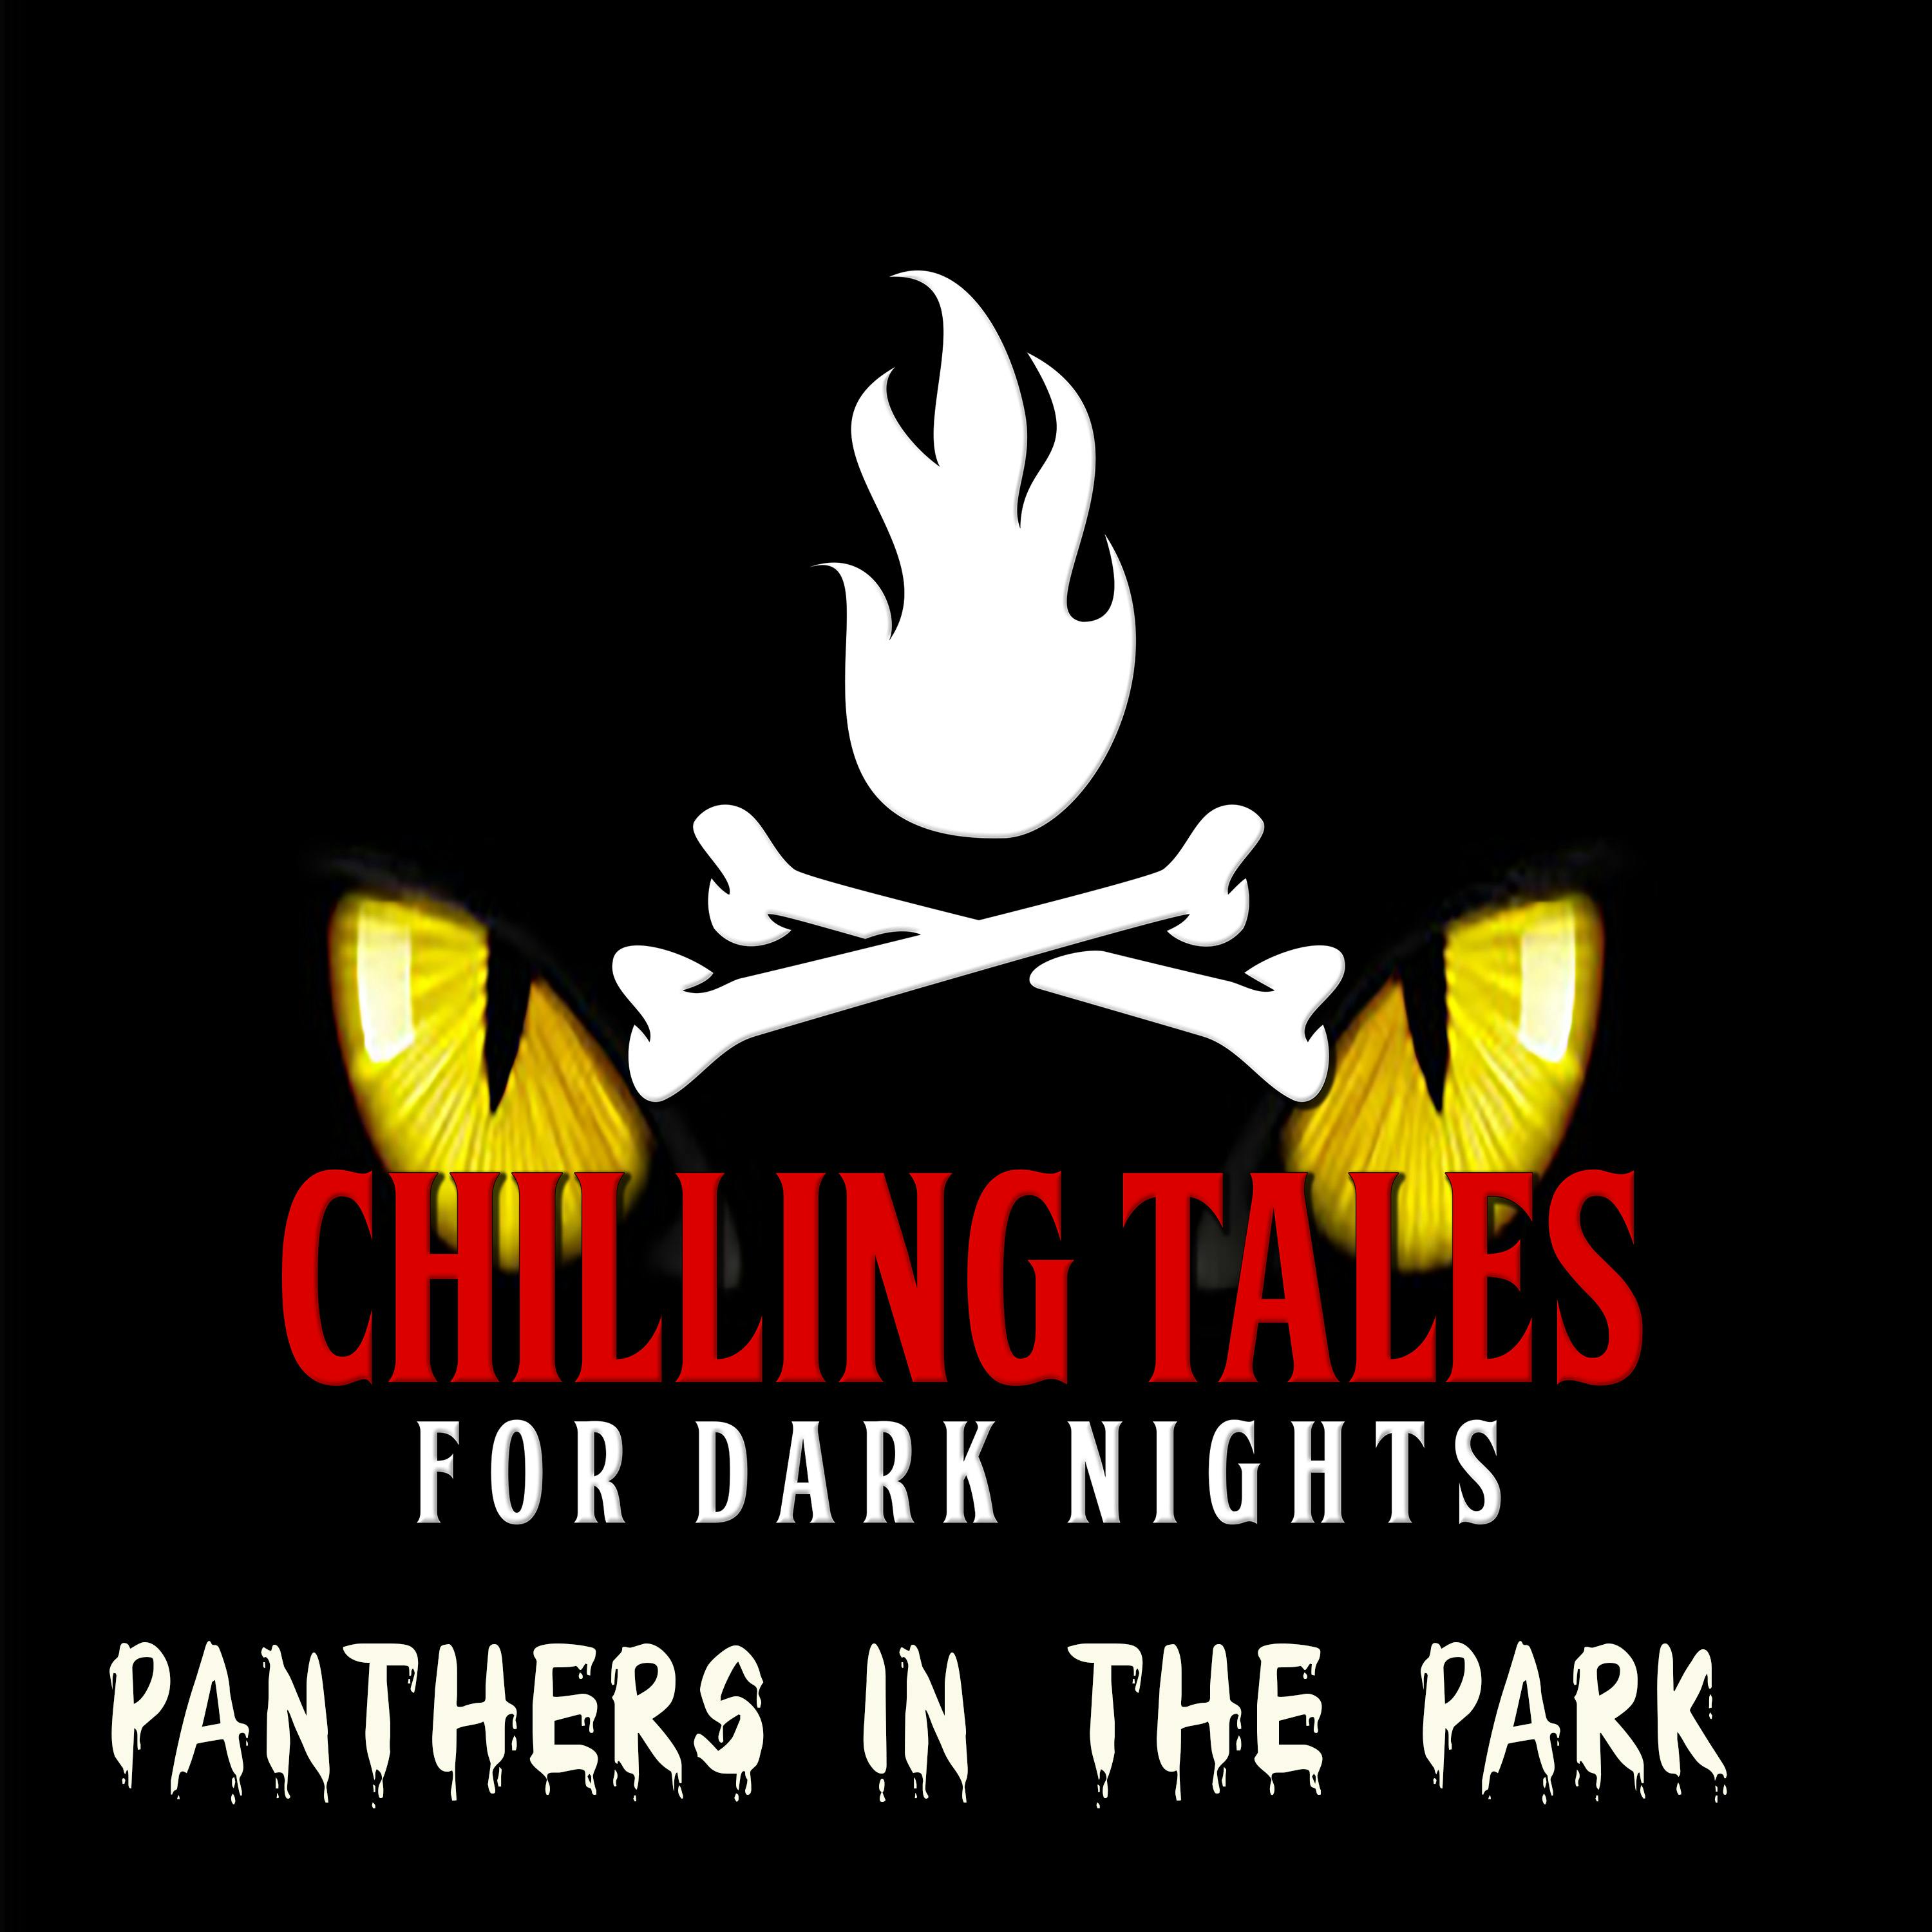 206: Panthers in the Park - Chilling Tales for Dark Nights